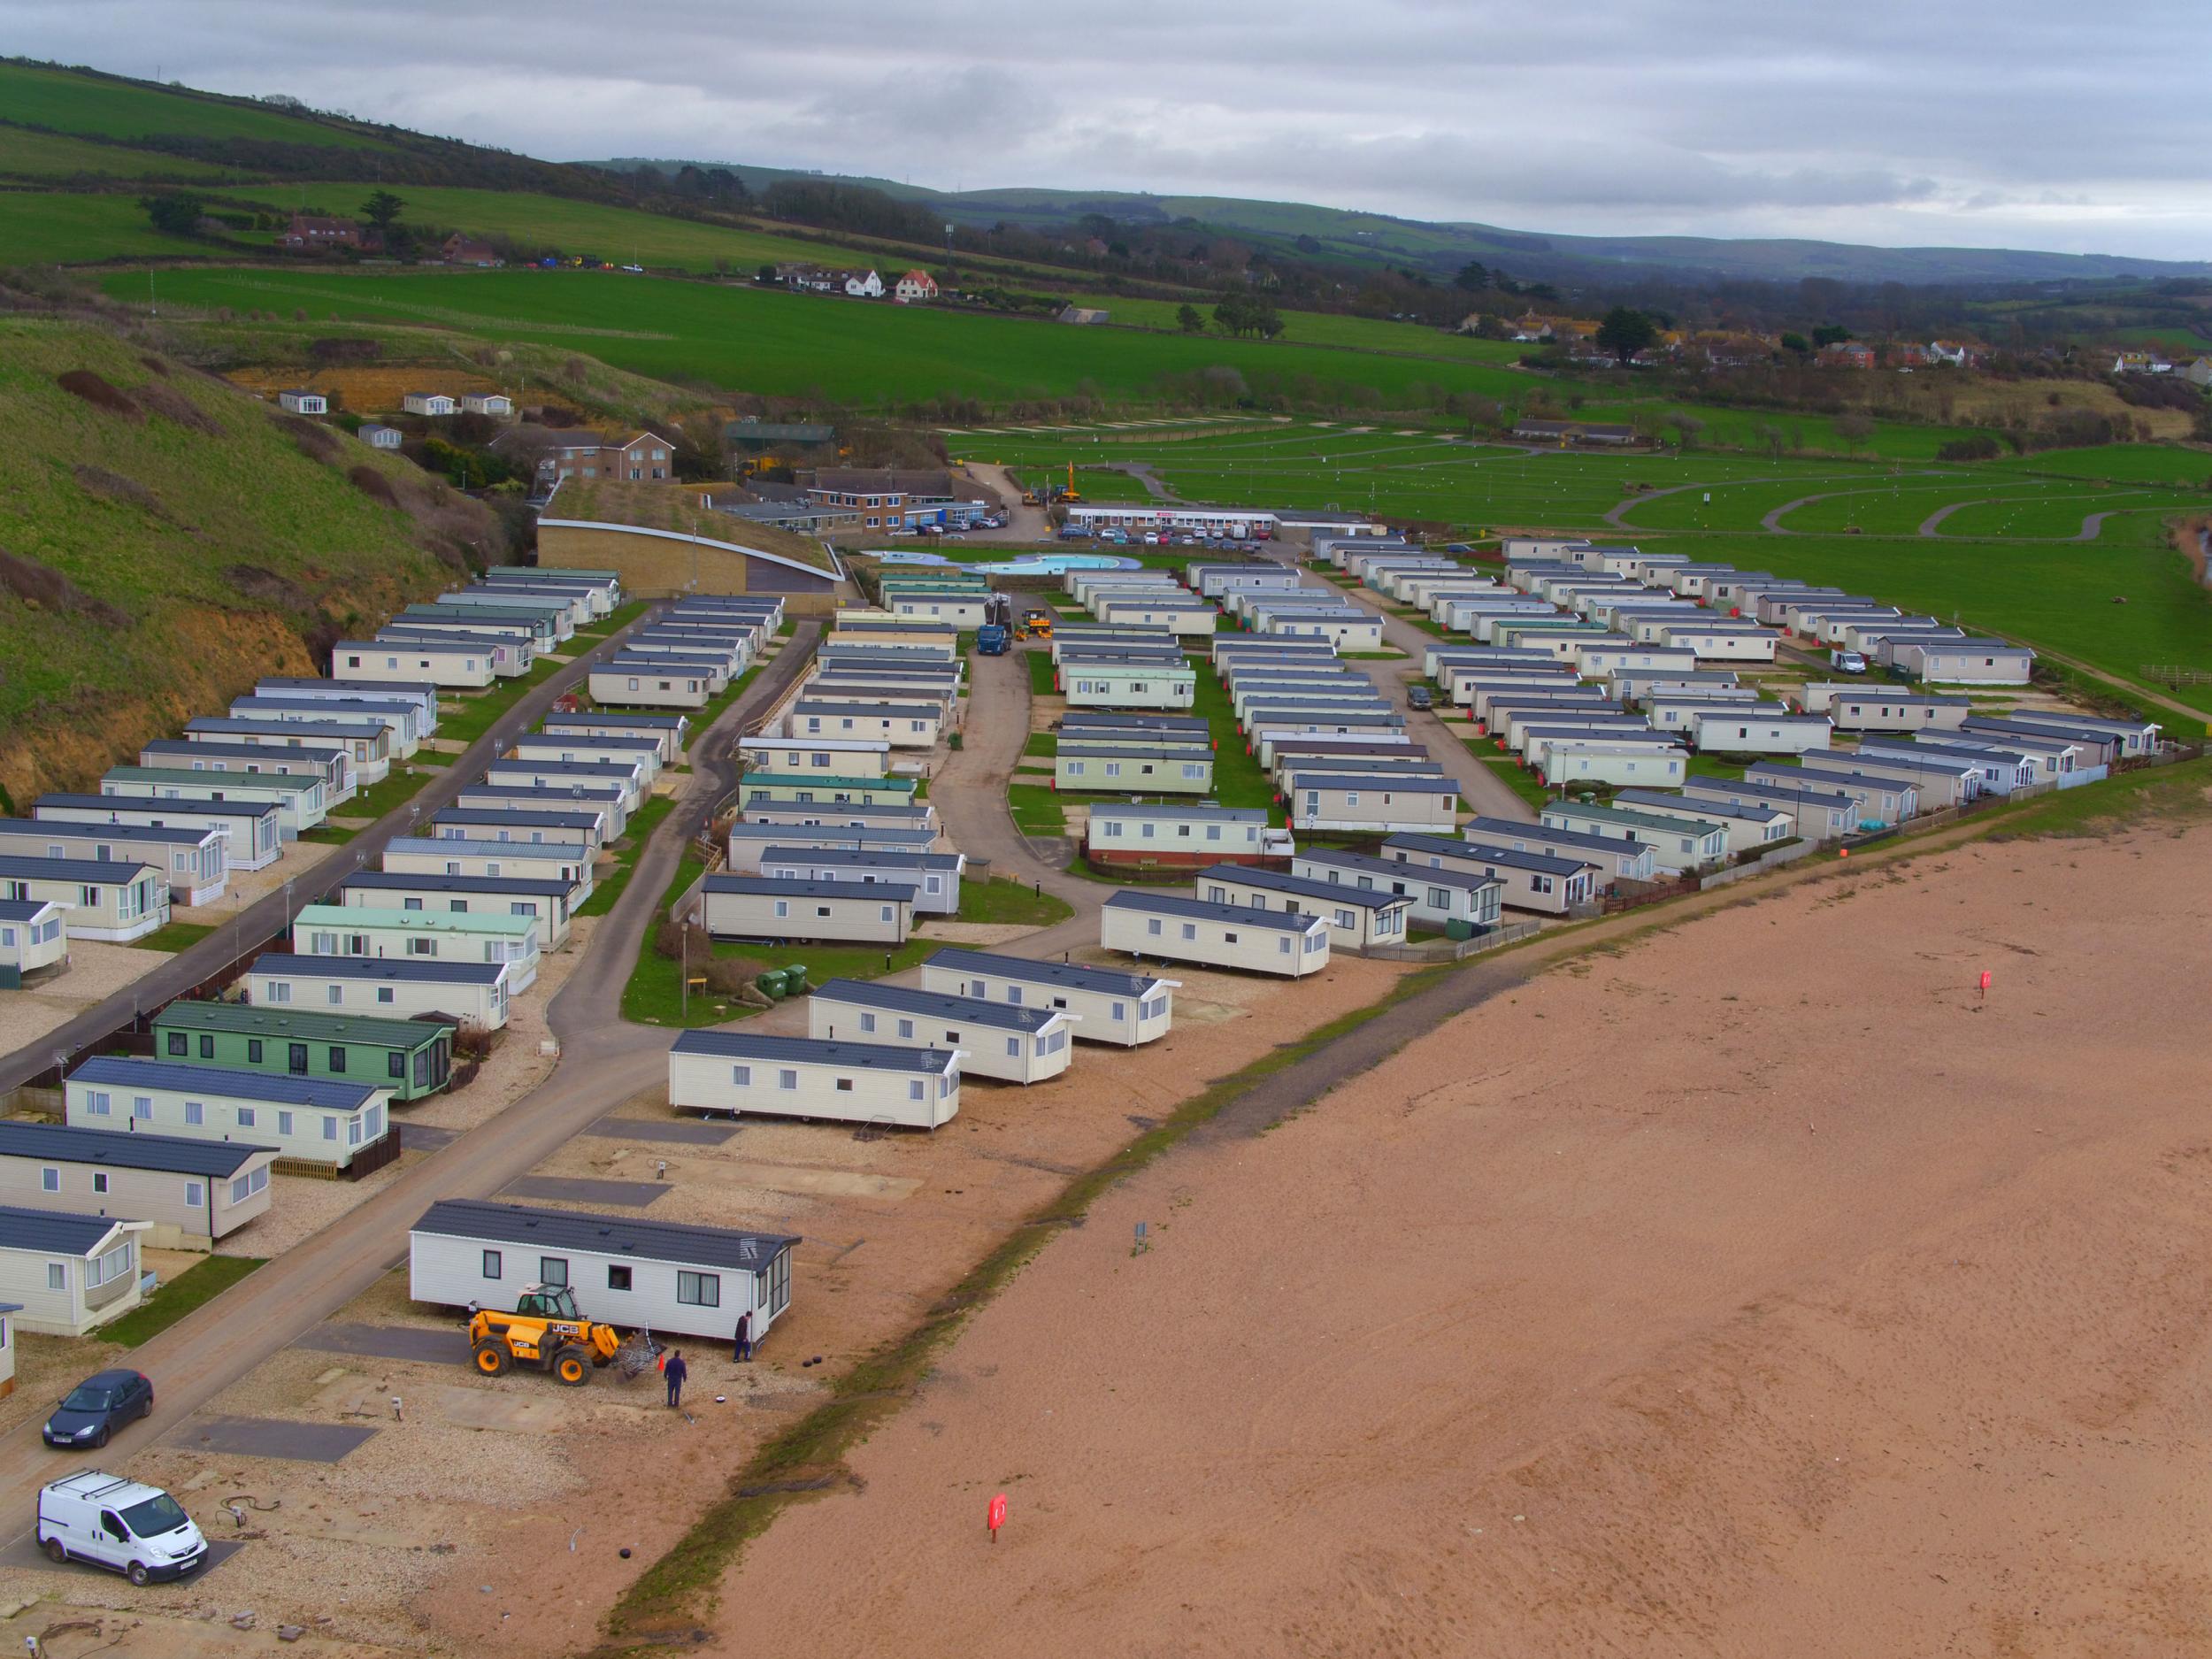 An aerial view of caravans at the Freshwater Beach Holiday Park near West Bay, Dorset